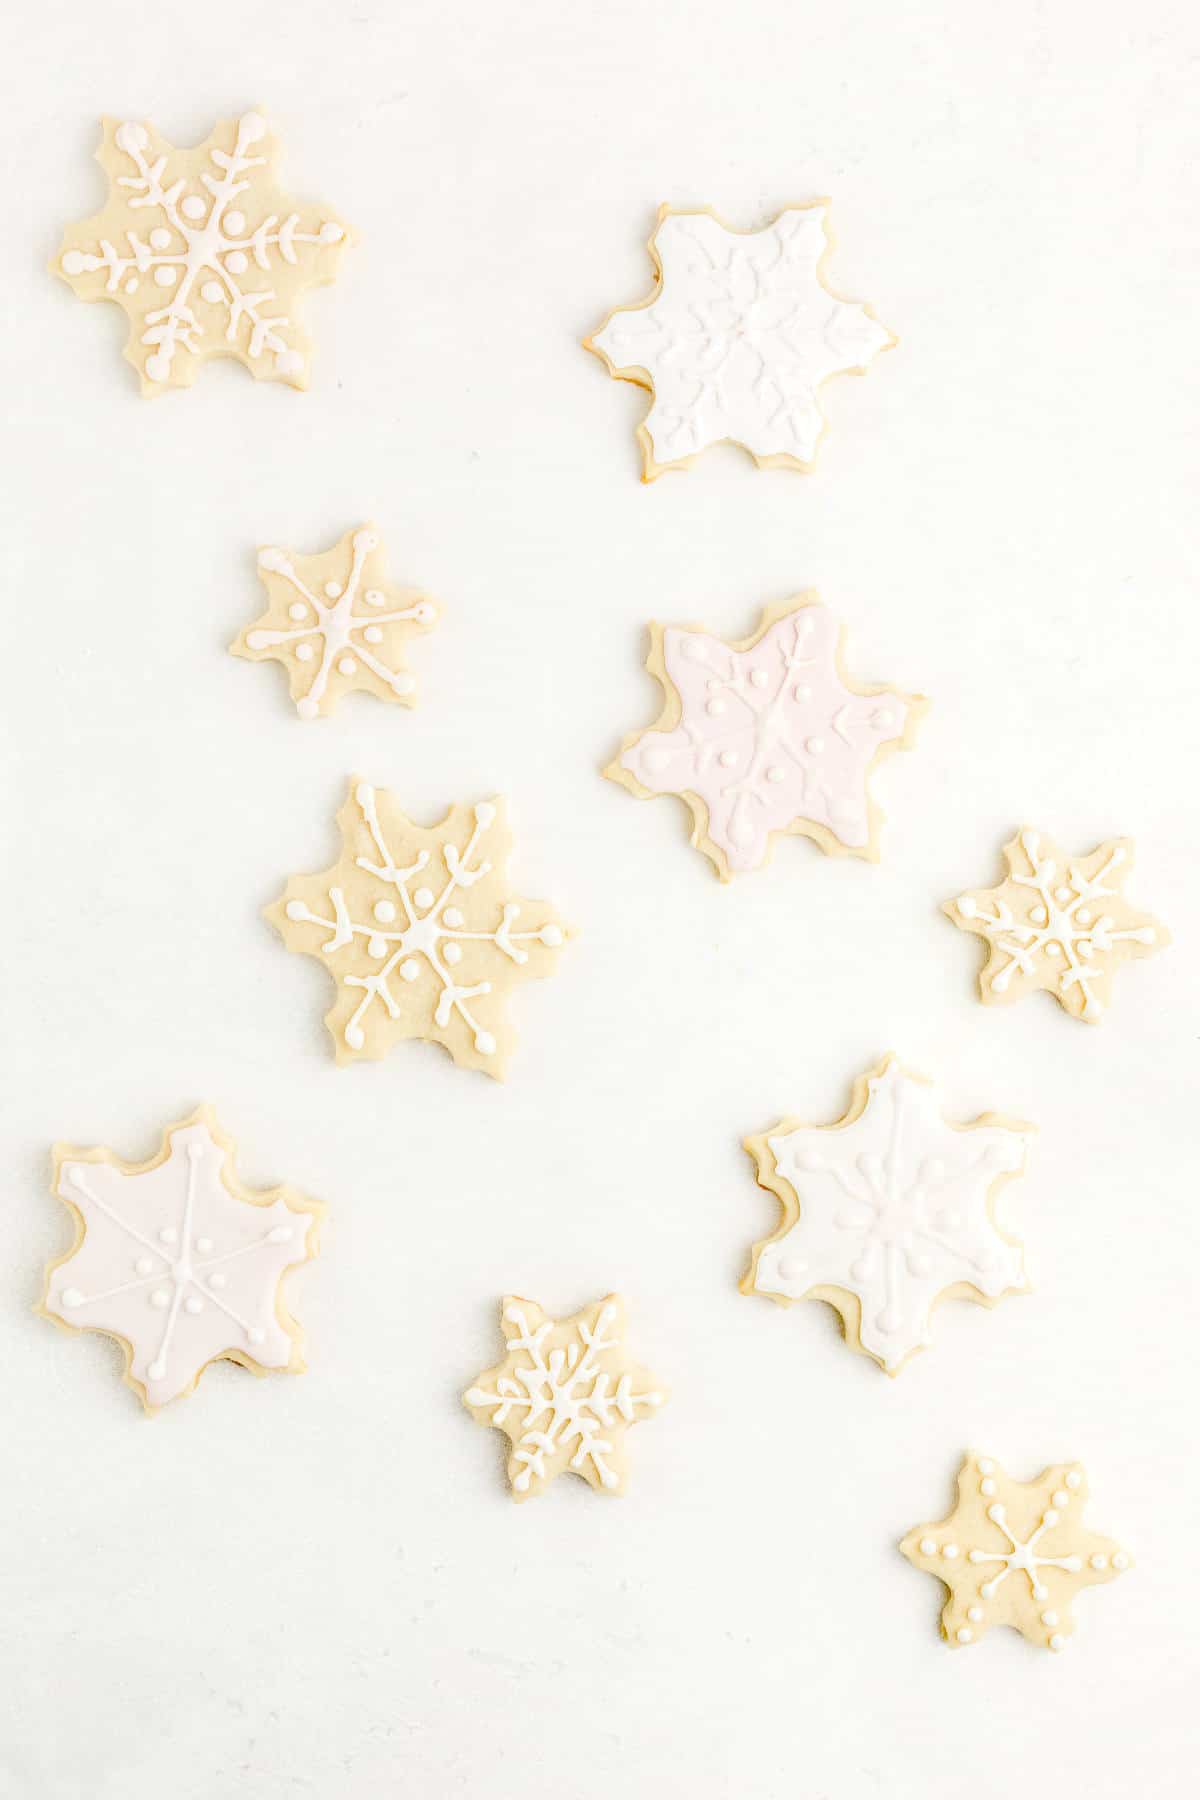 Snowflake-shaped sugar cookies on light background decorated with egg-free royal icing.